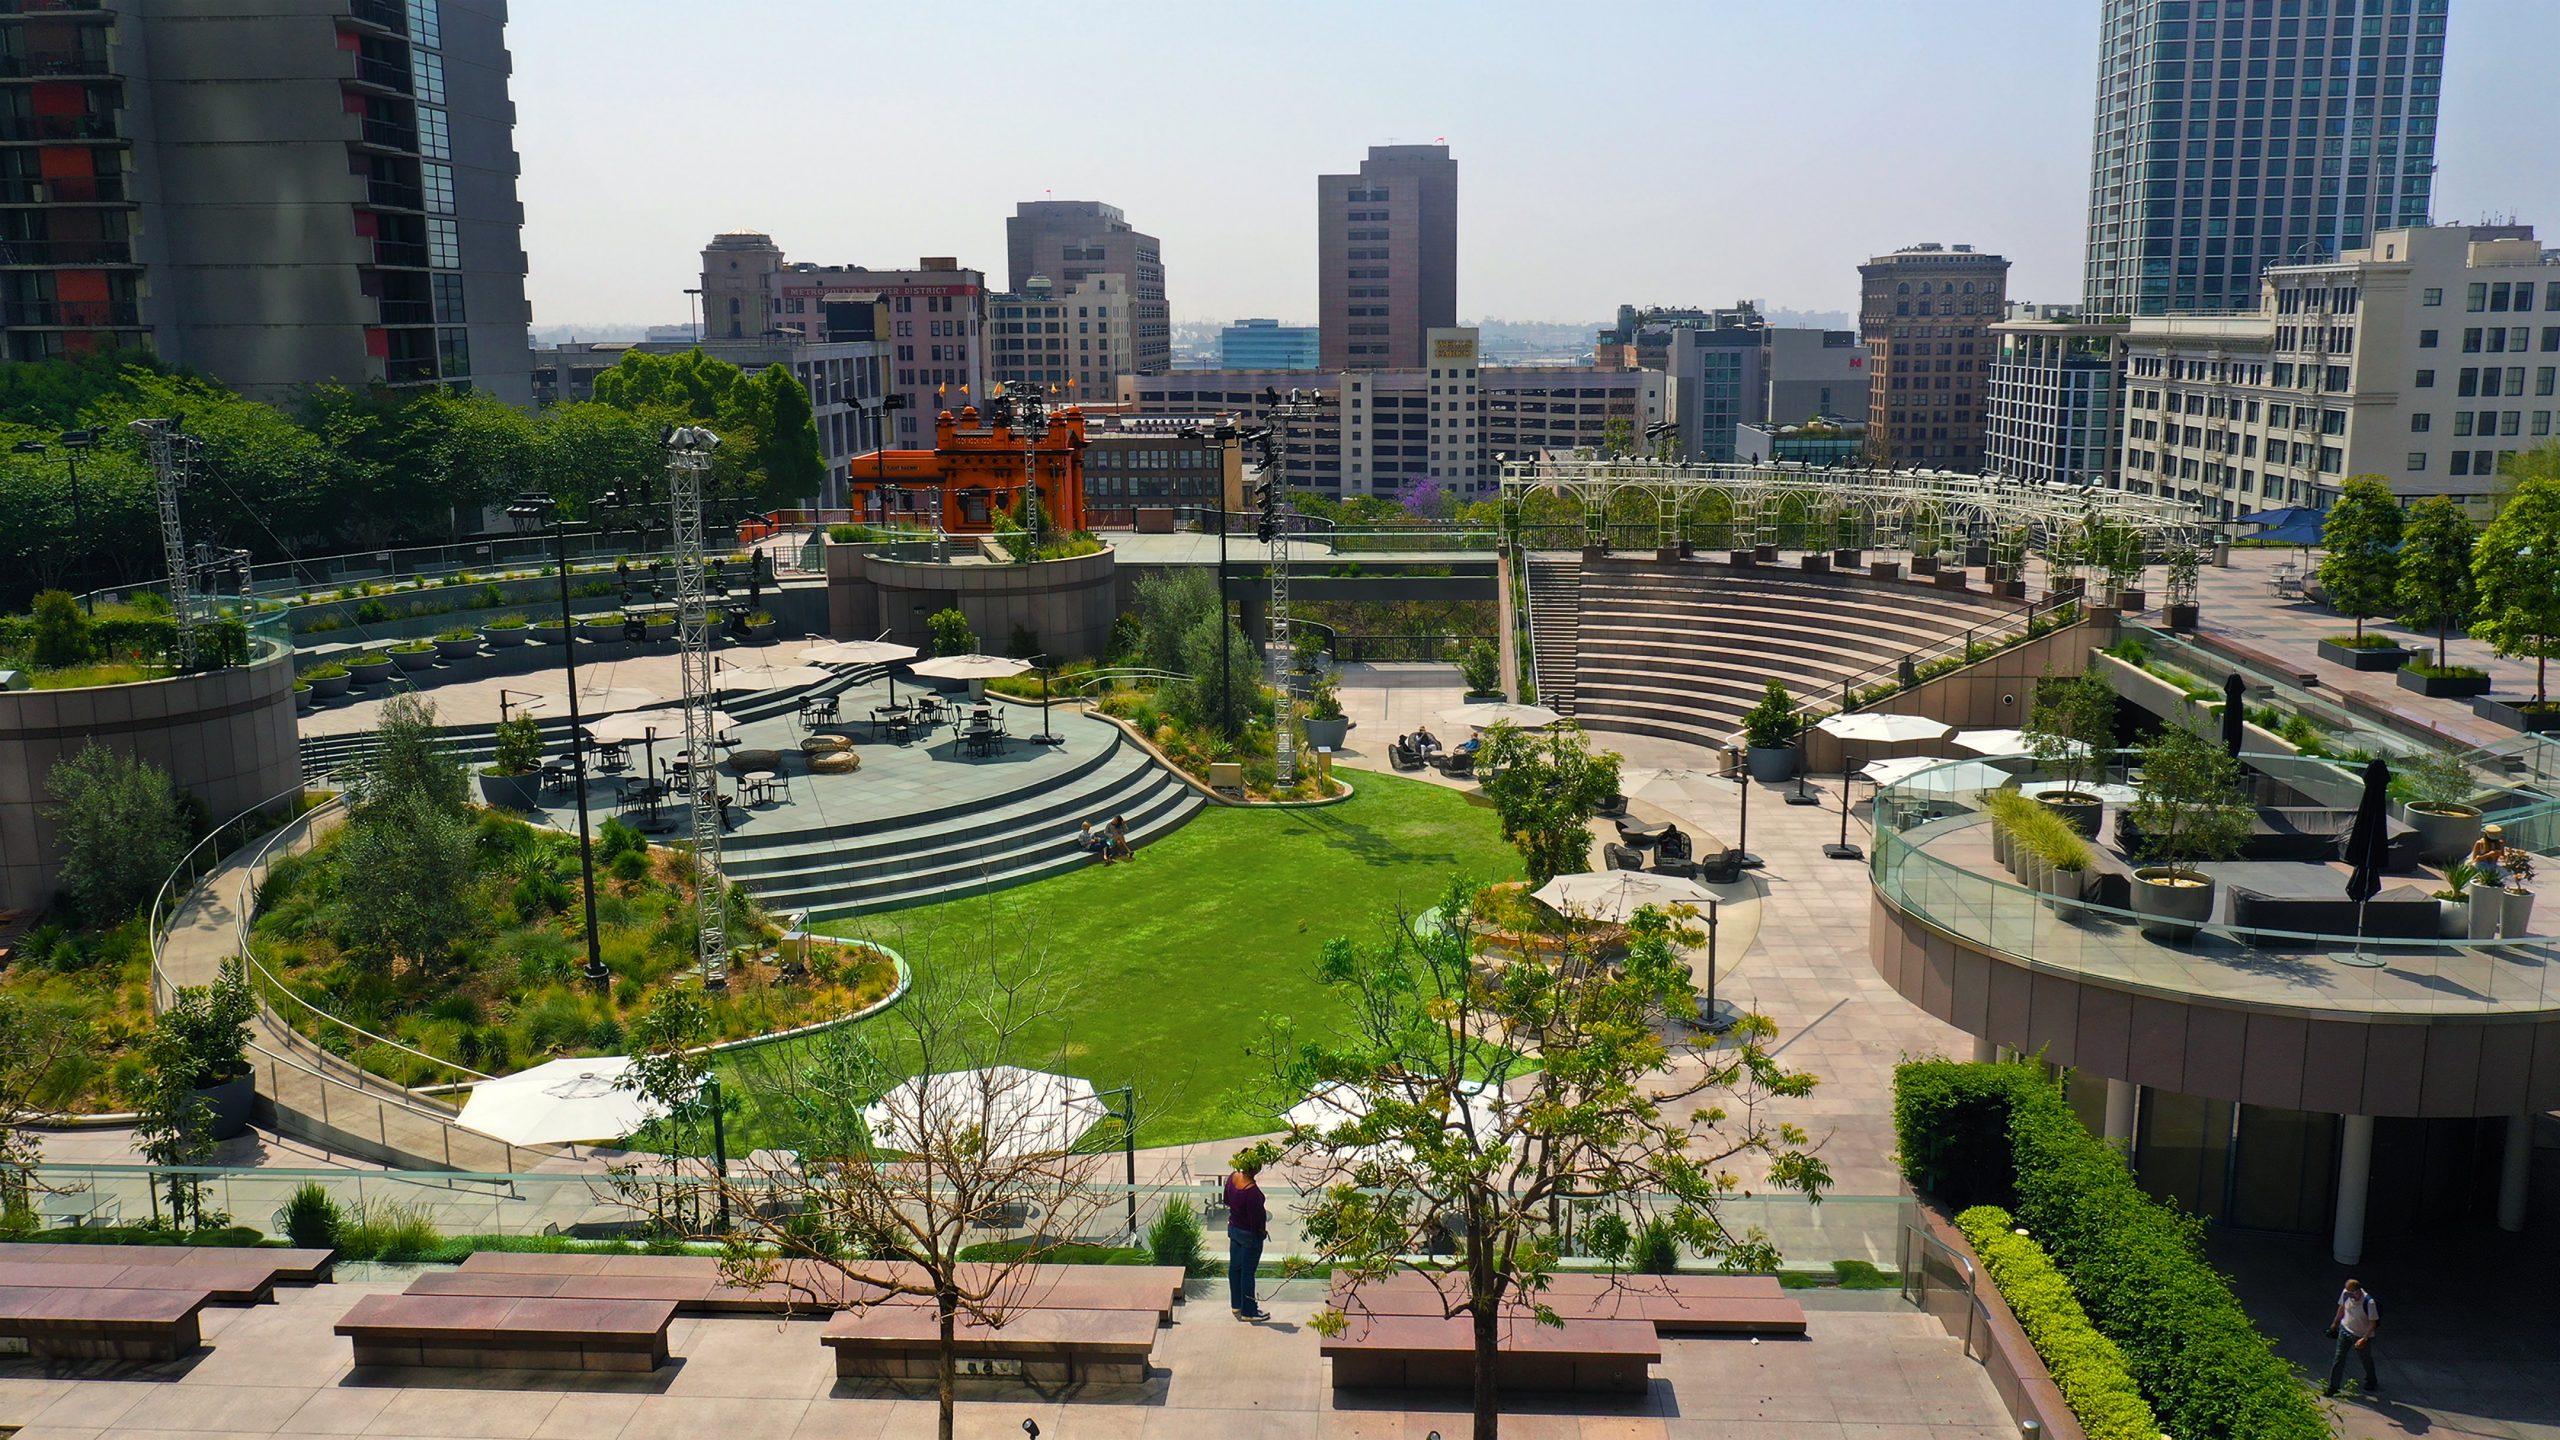 View of California Plaza during the daytime from the top level.